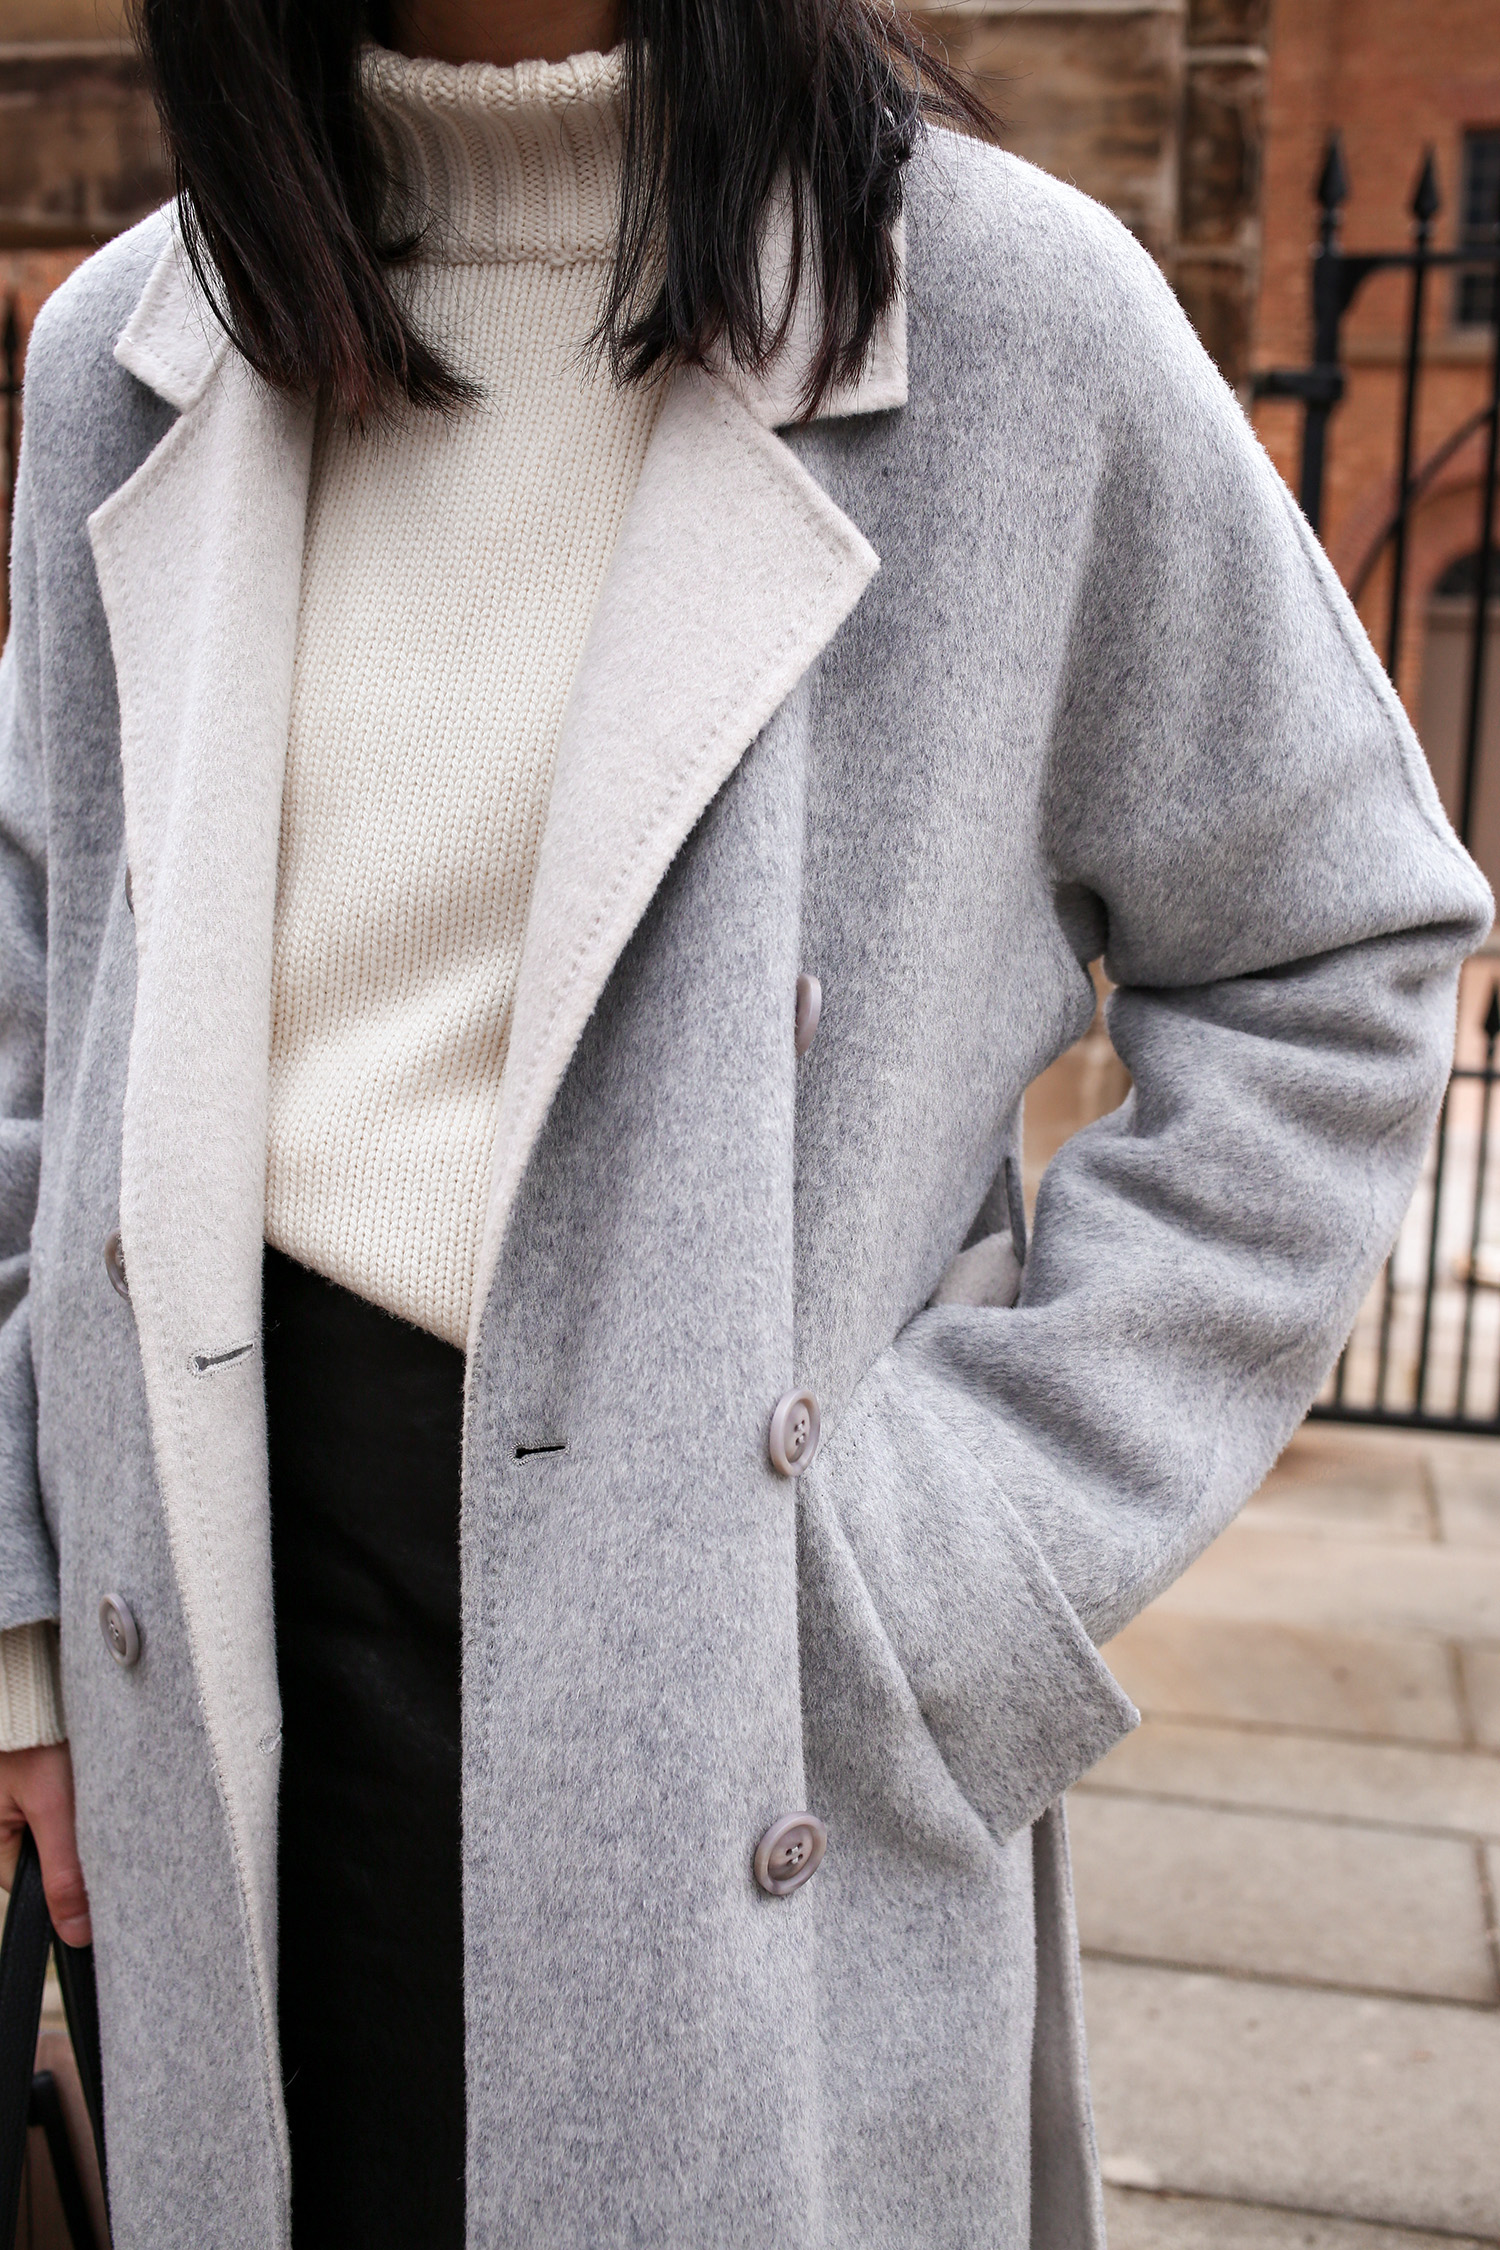 Five Winter Wardrobe essentials you *need* in your closet ...